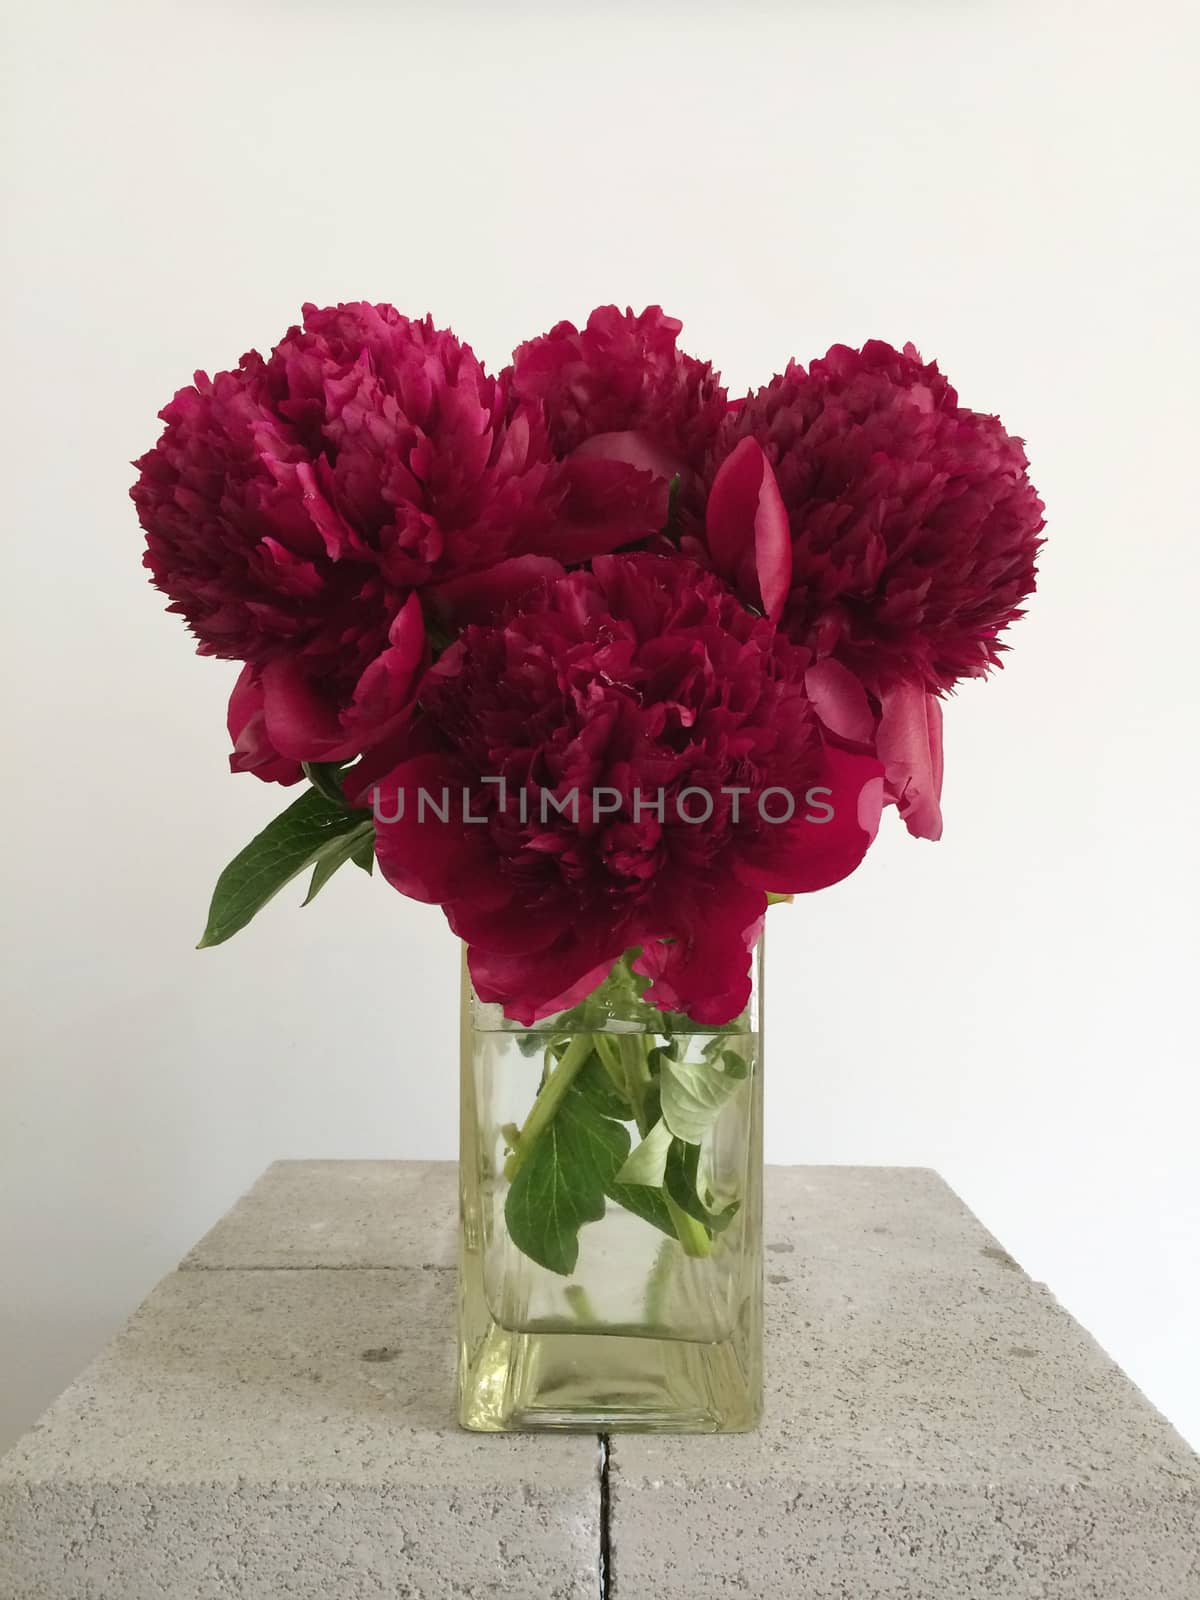 Bouquet of red peonies in a vase